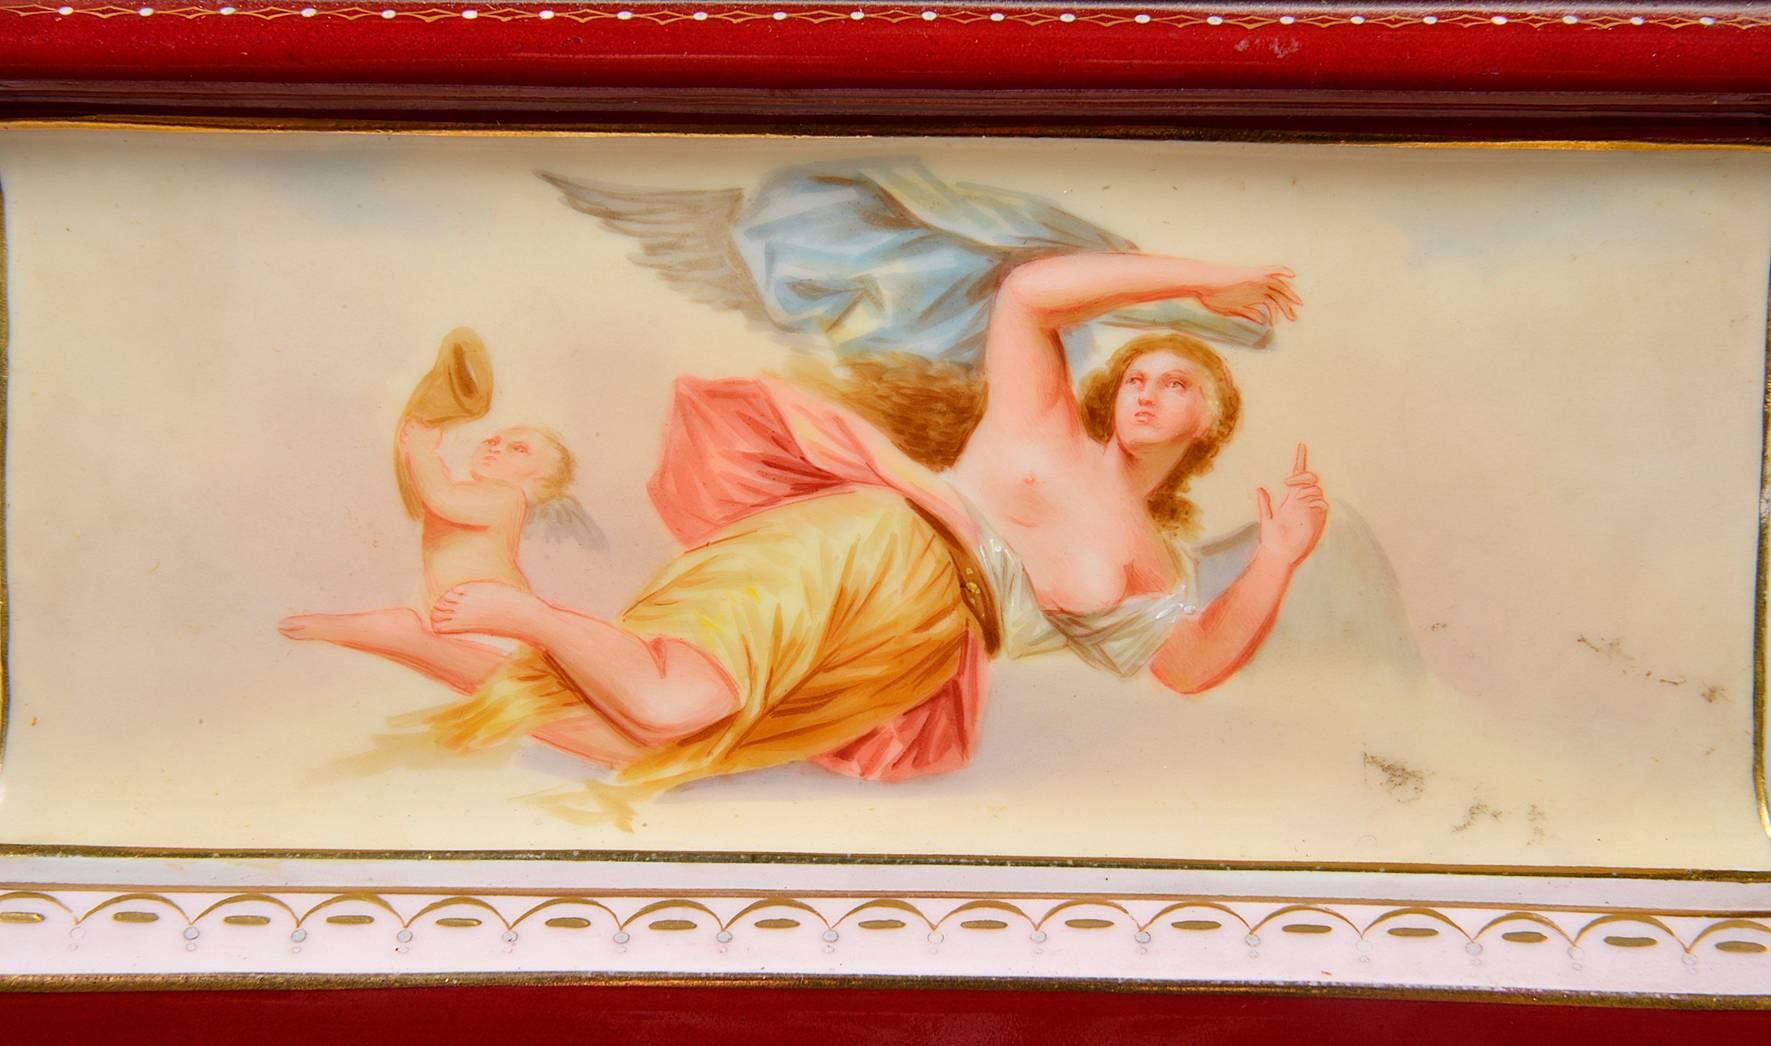 A good quality late 19th century Vienna porcelain mantel clock, having hand-painted classical figures and cherubs.